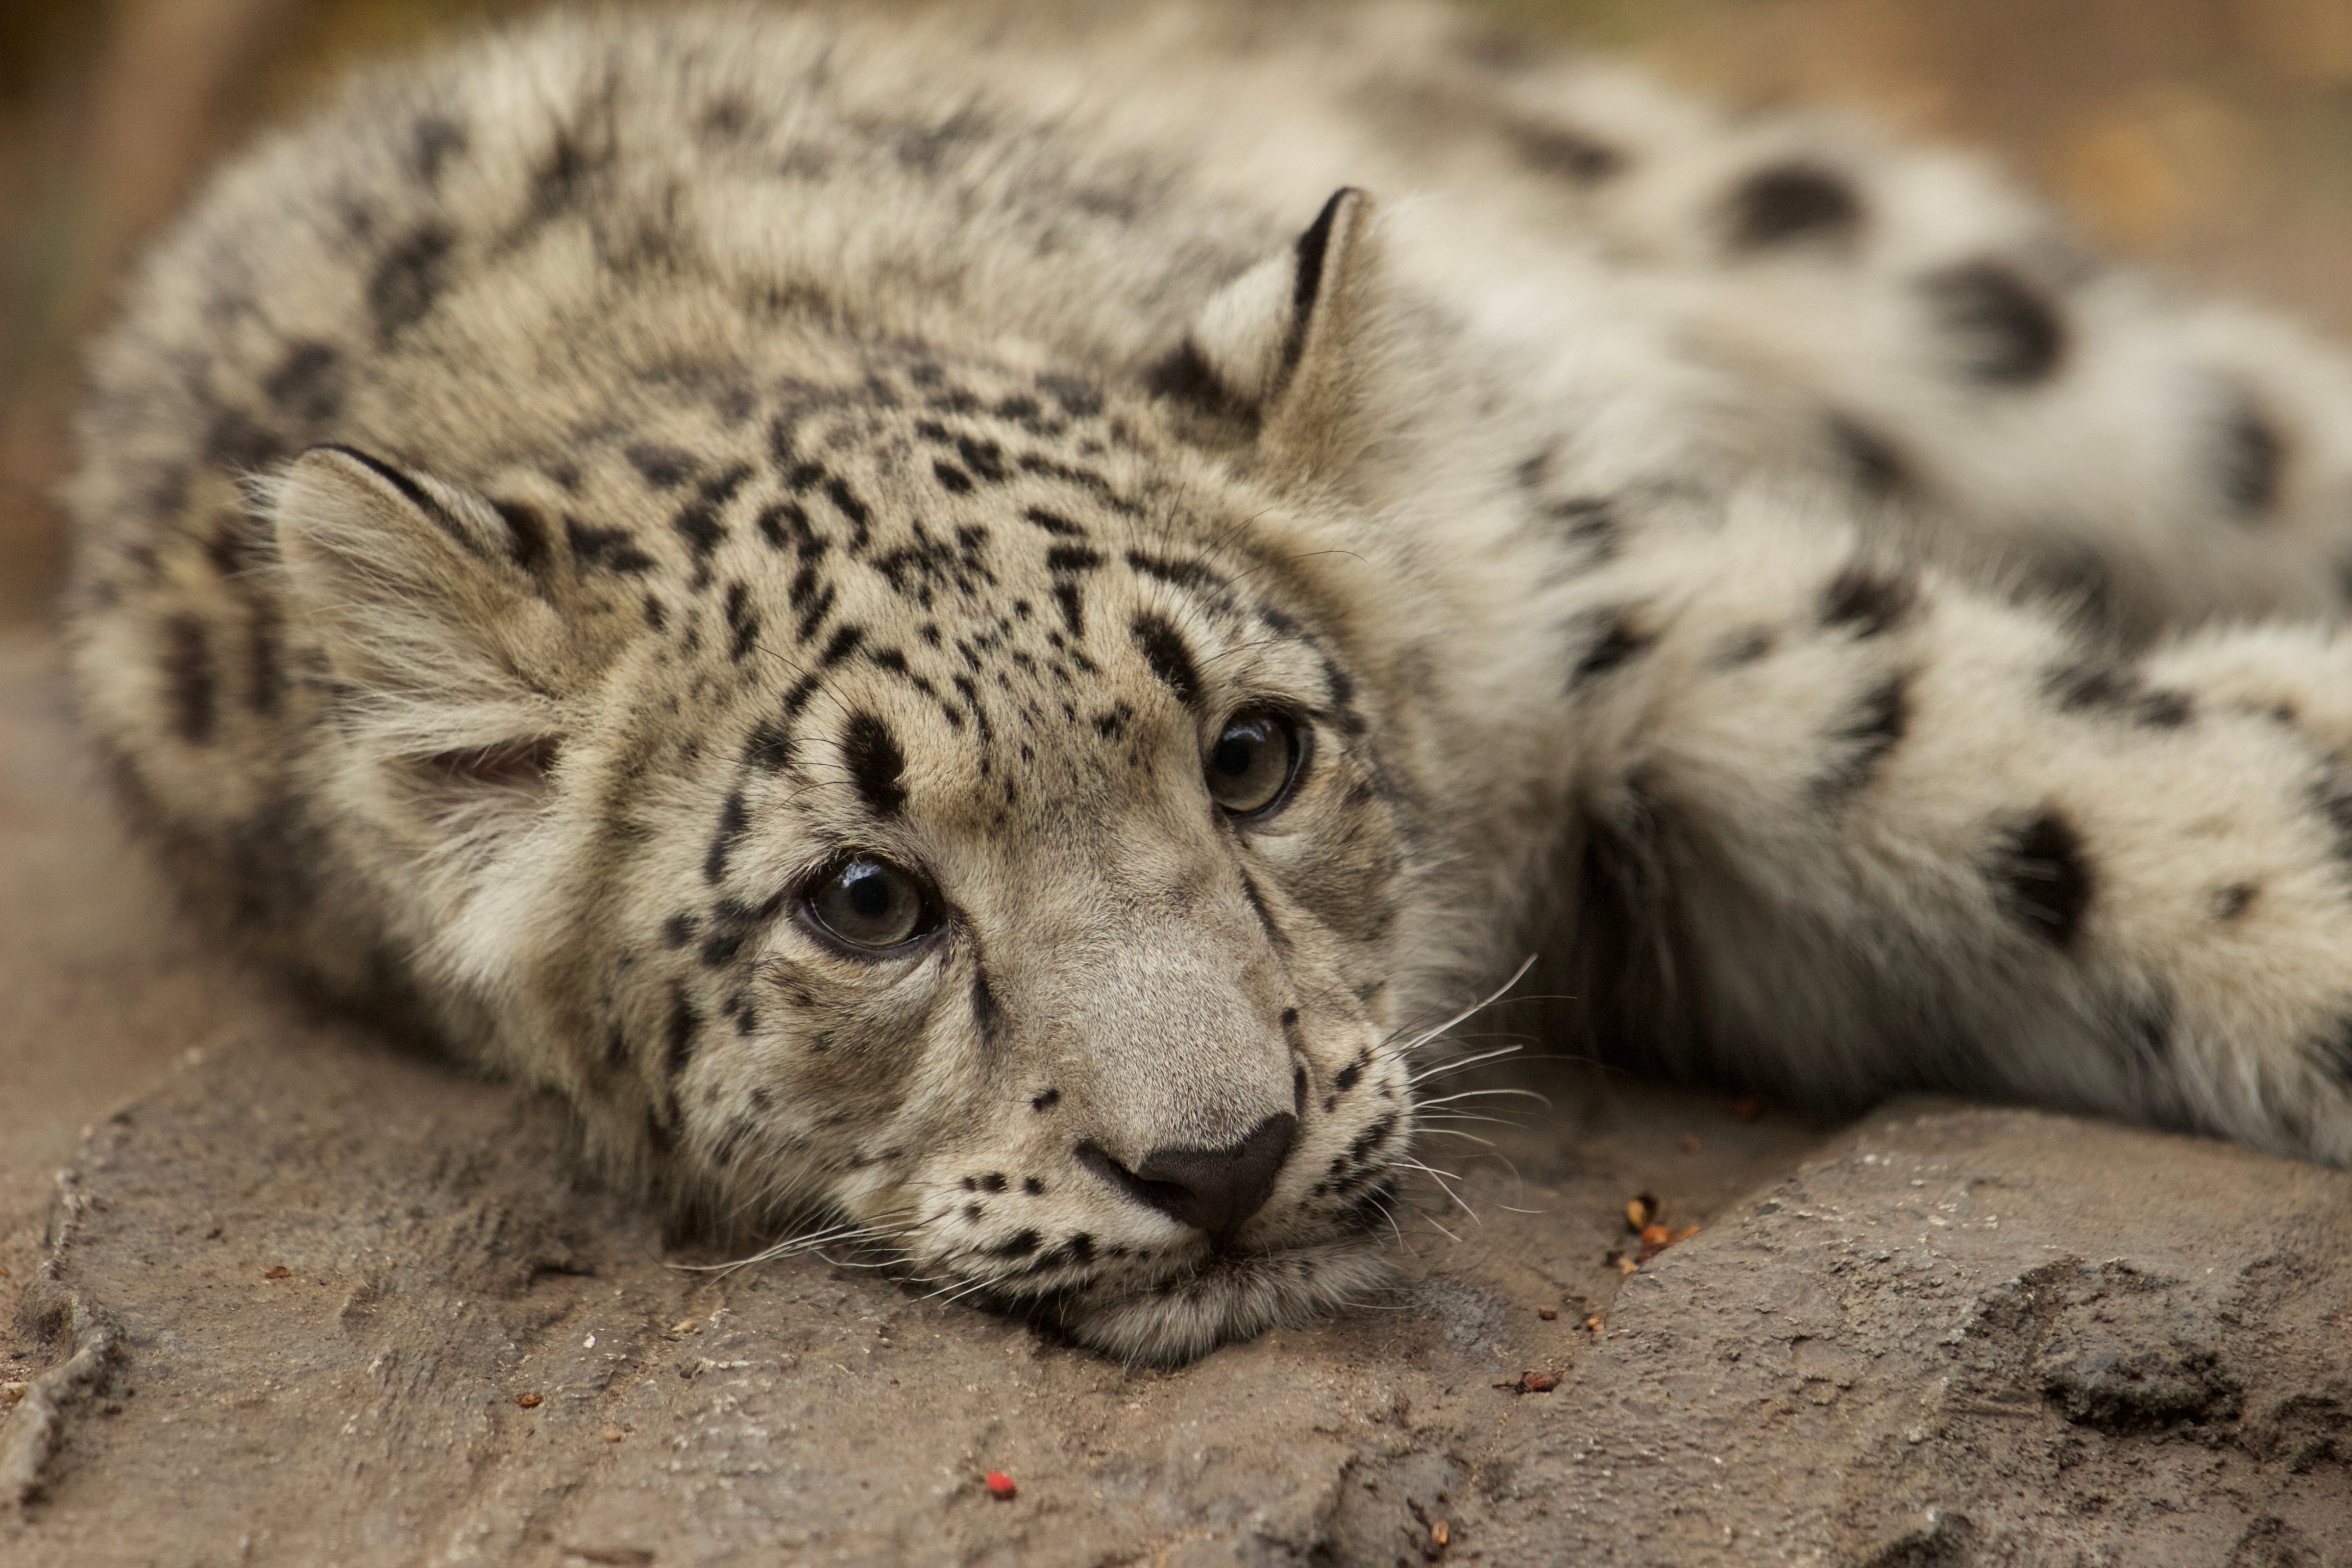 A snow leopard cub rests at New York City's Central Park Zoo. (Alex Fitzpatrick for TIME:)